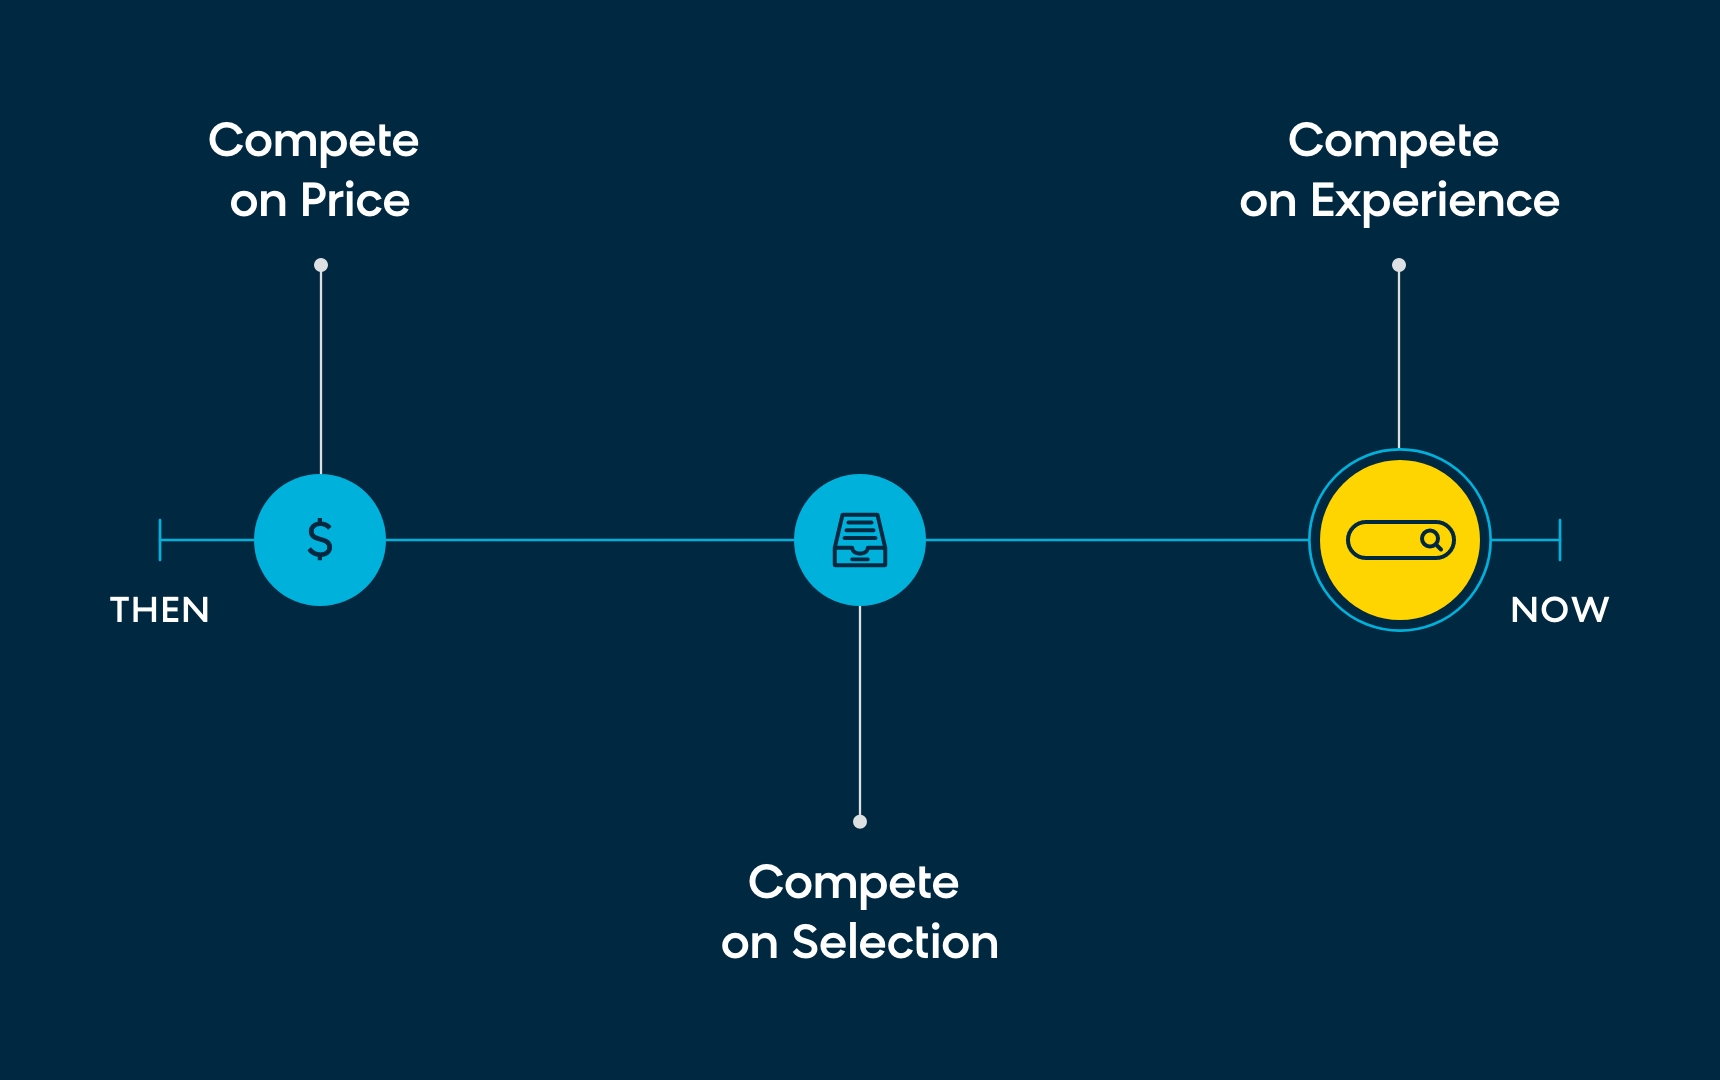 Three Phases of E-Commerce - Compete on Price, Compete on Selection, and Compete on Experience